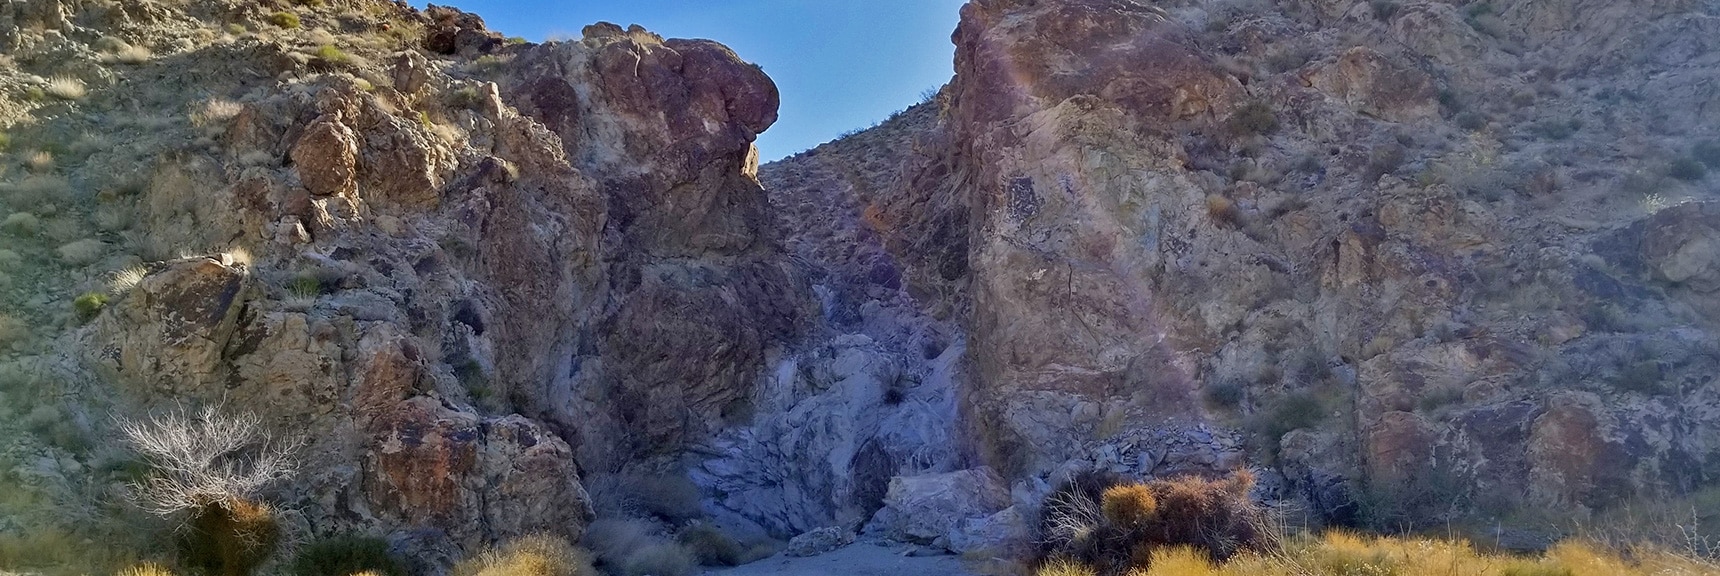 Box Canyon Barrier at Upper End of Horse Thief Canyon Road | Mt Wilson, Black Mountains, Arizona, Lake Mead National Recreation Area